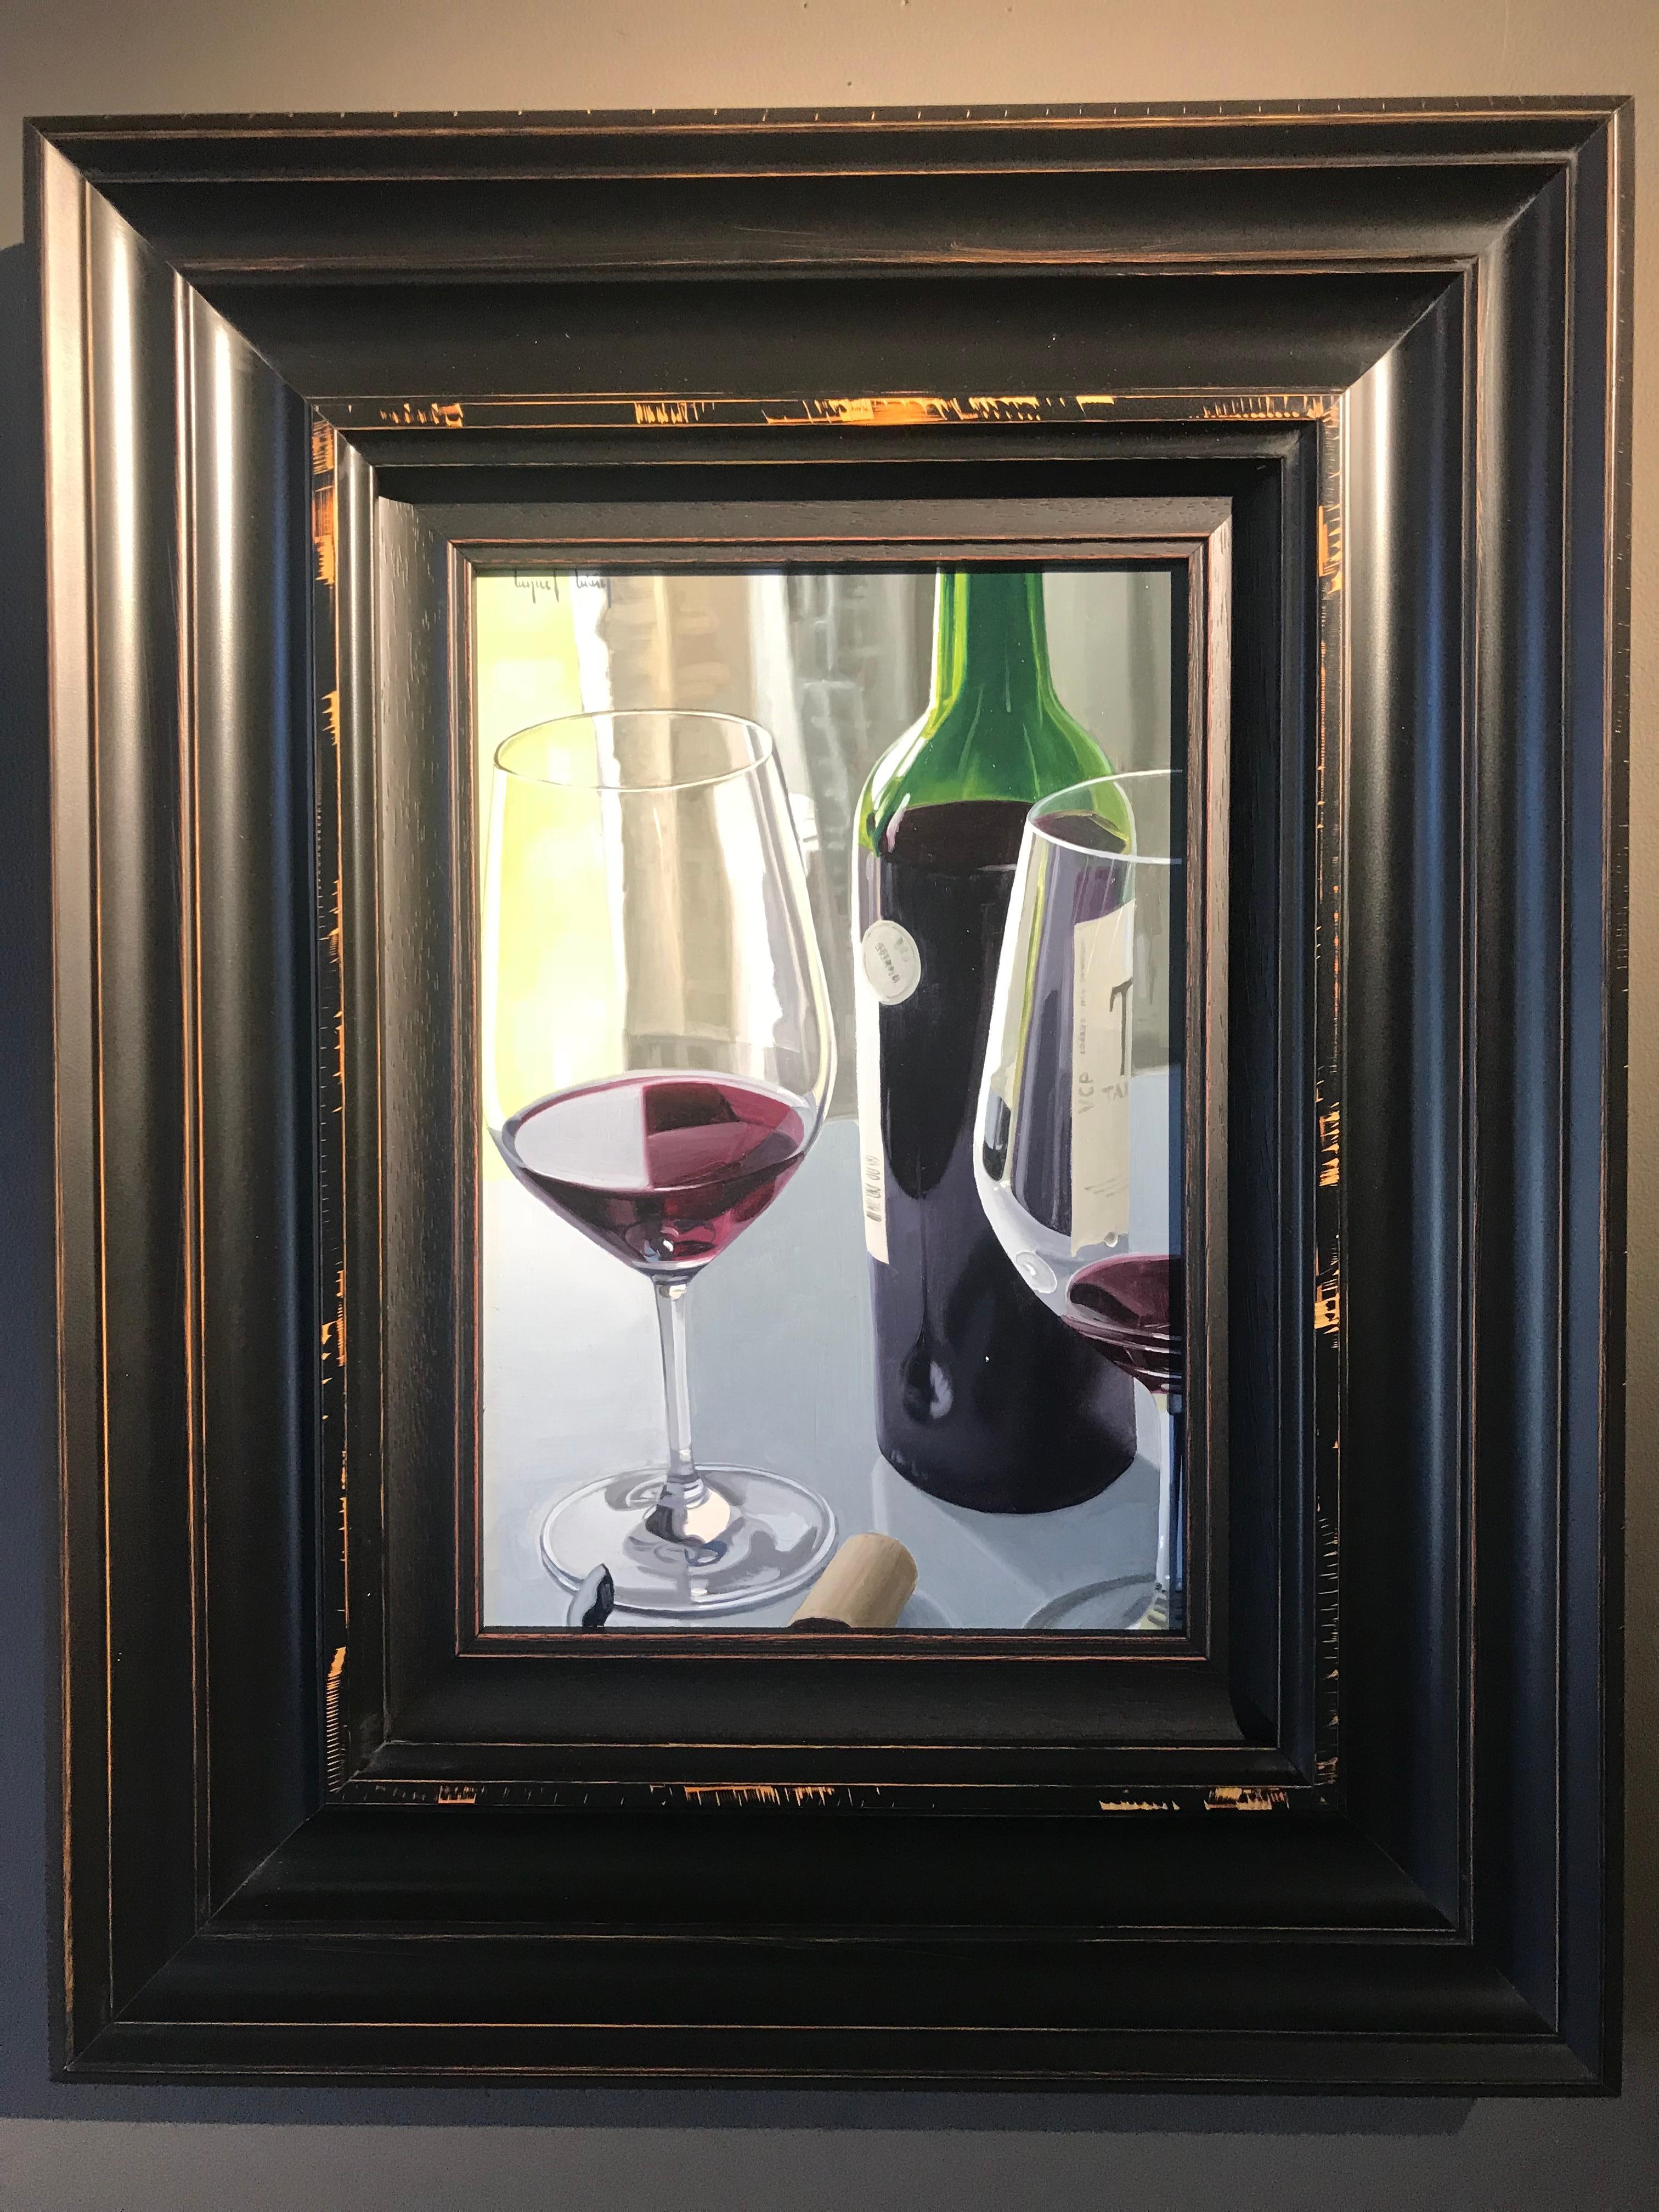 Contemporary Still life 'Fine Wine' by Angel Nunez  - Painting by Miguel Angel Nuñez